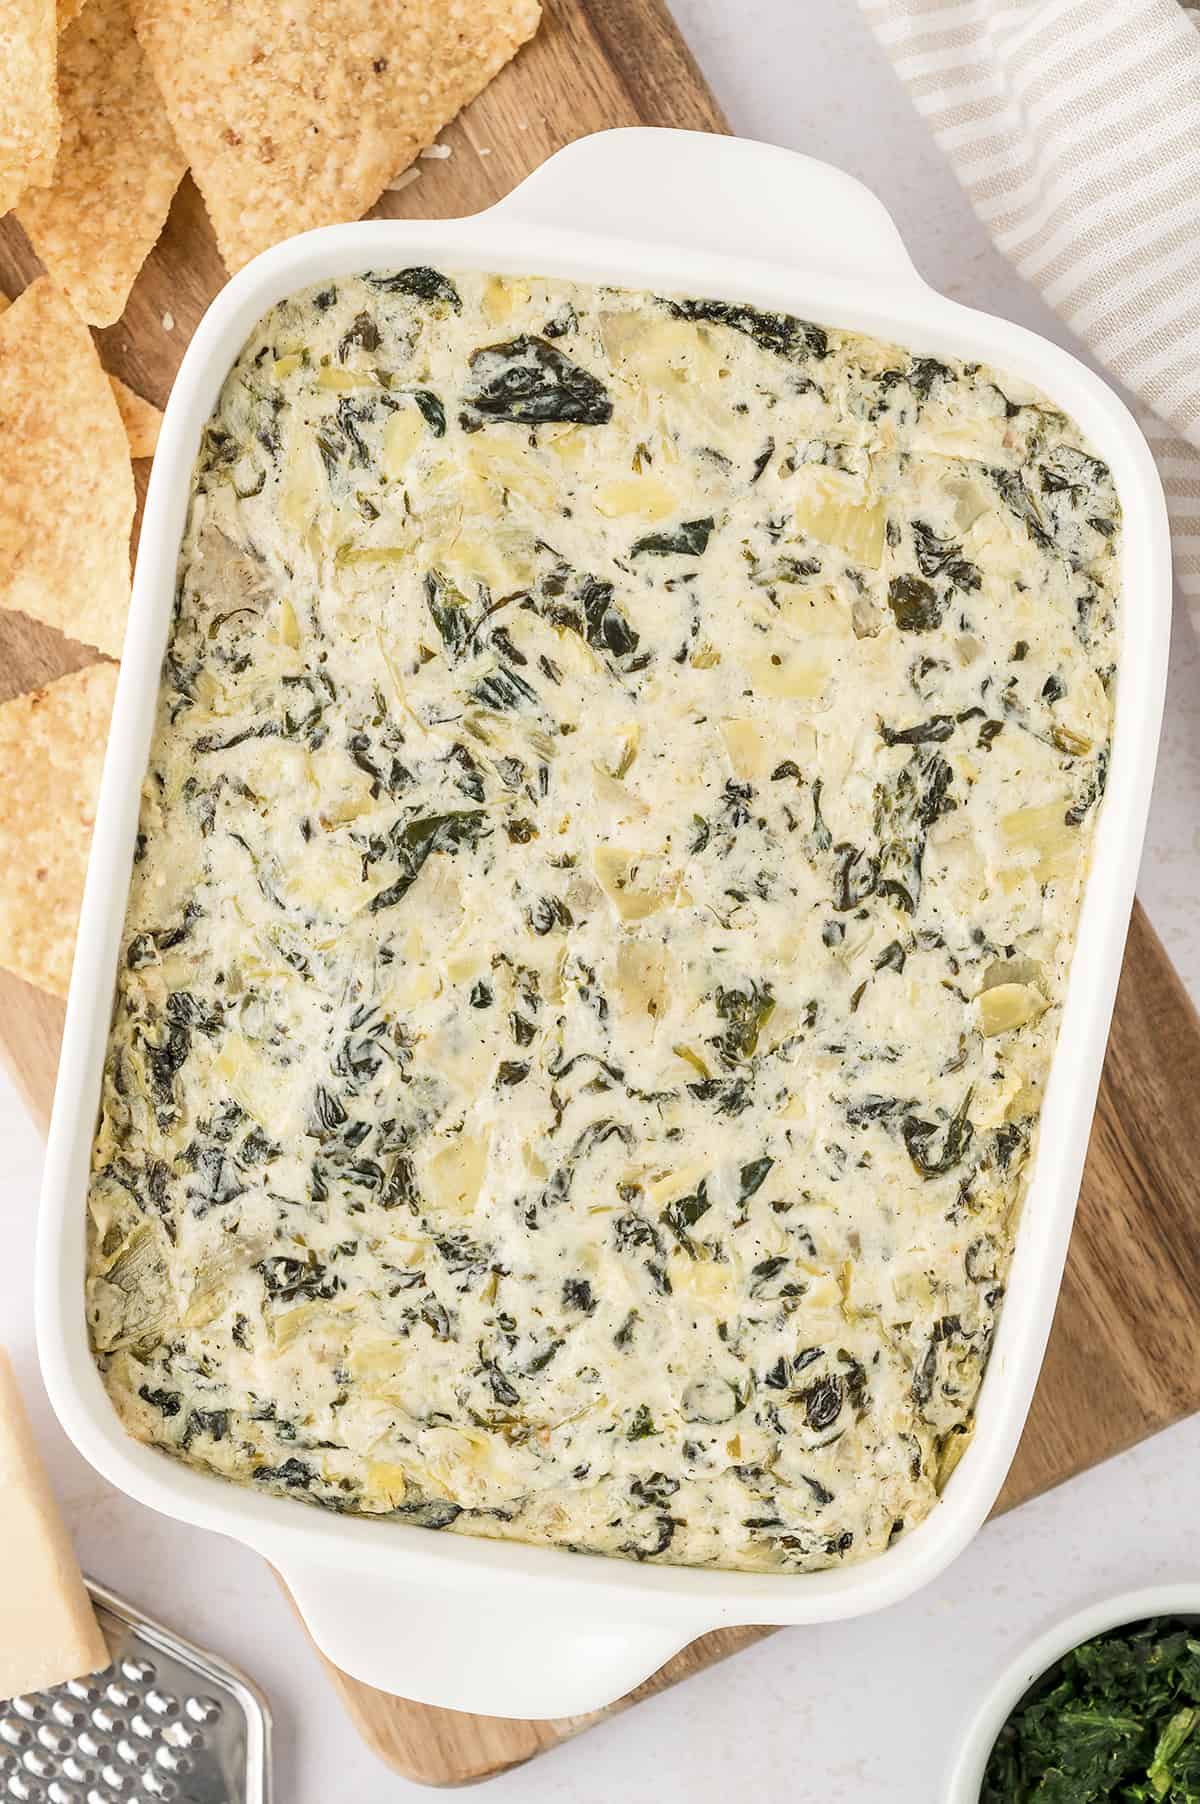 Baked spinach artichoke dip in white dish.